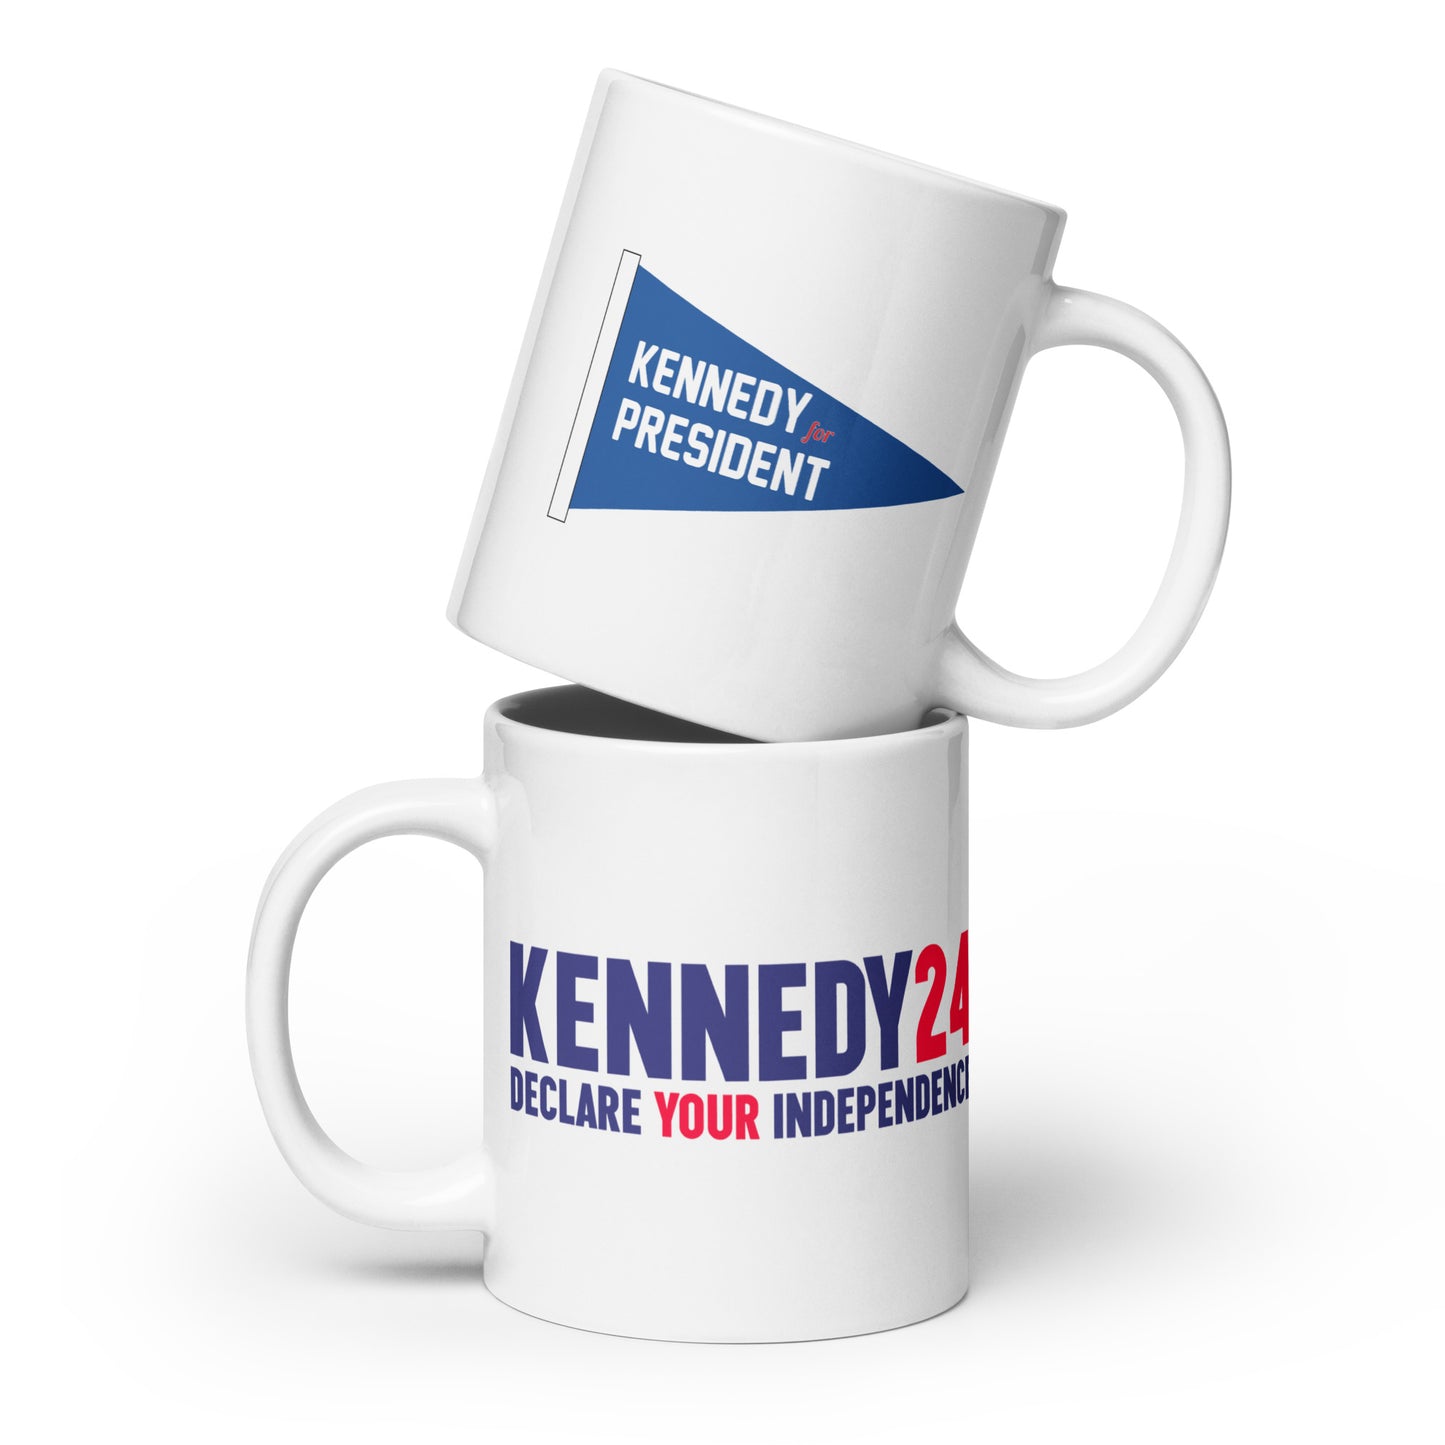 Declare Your Independence Mug